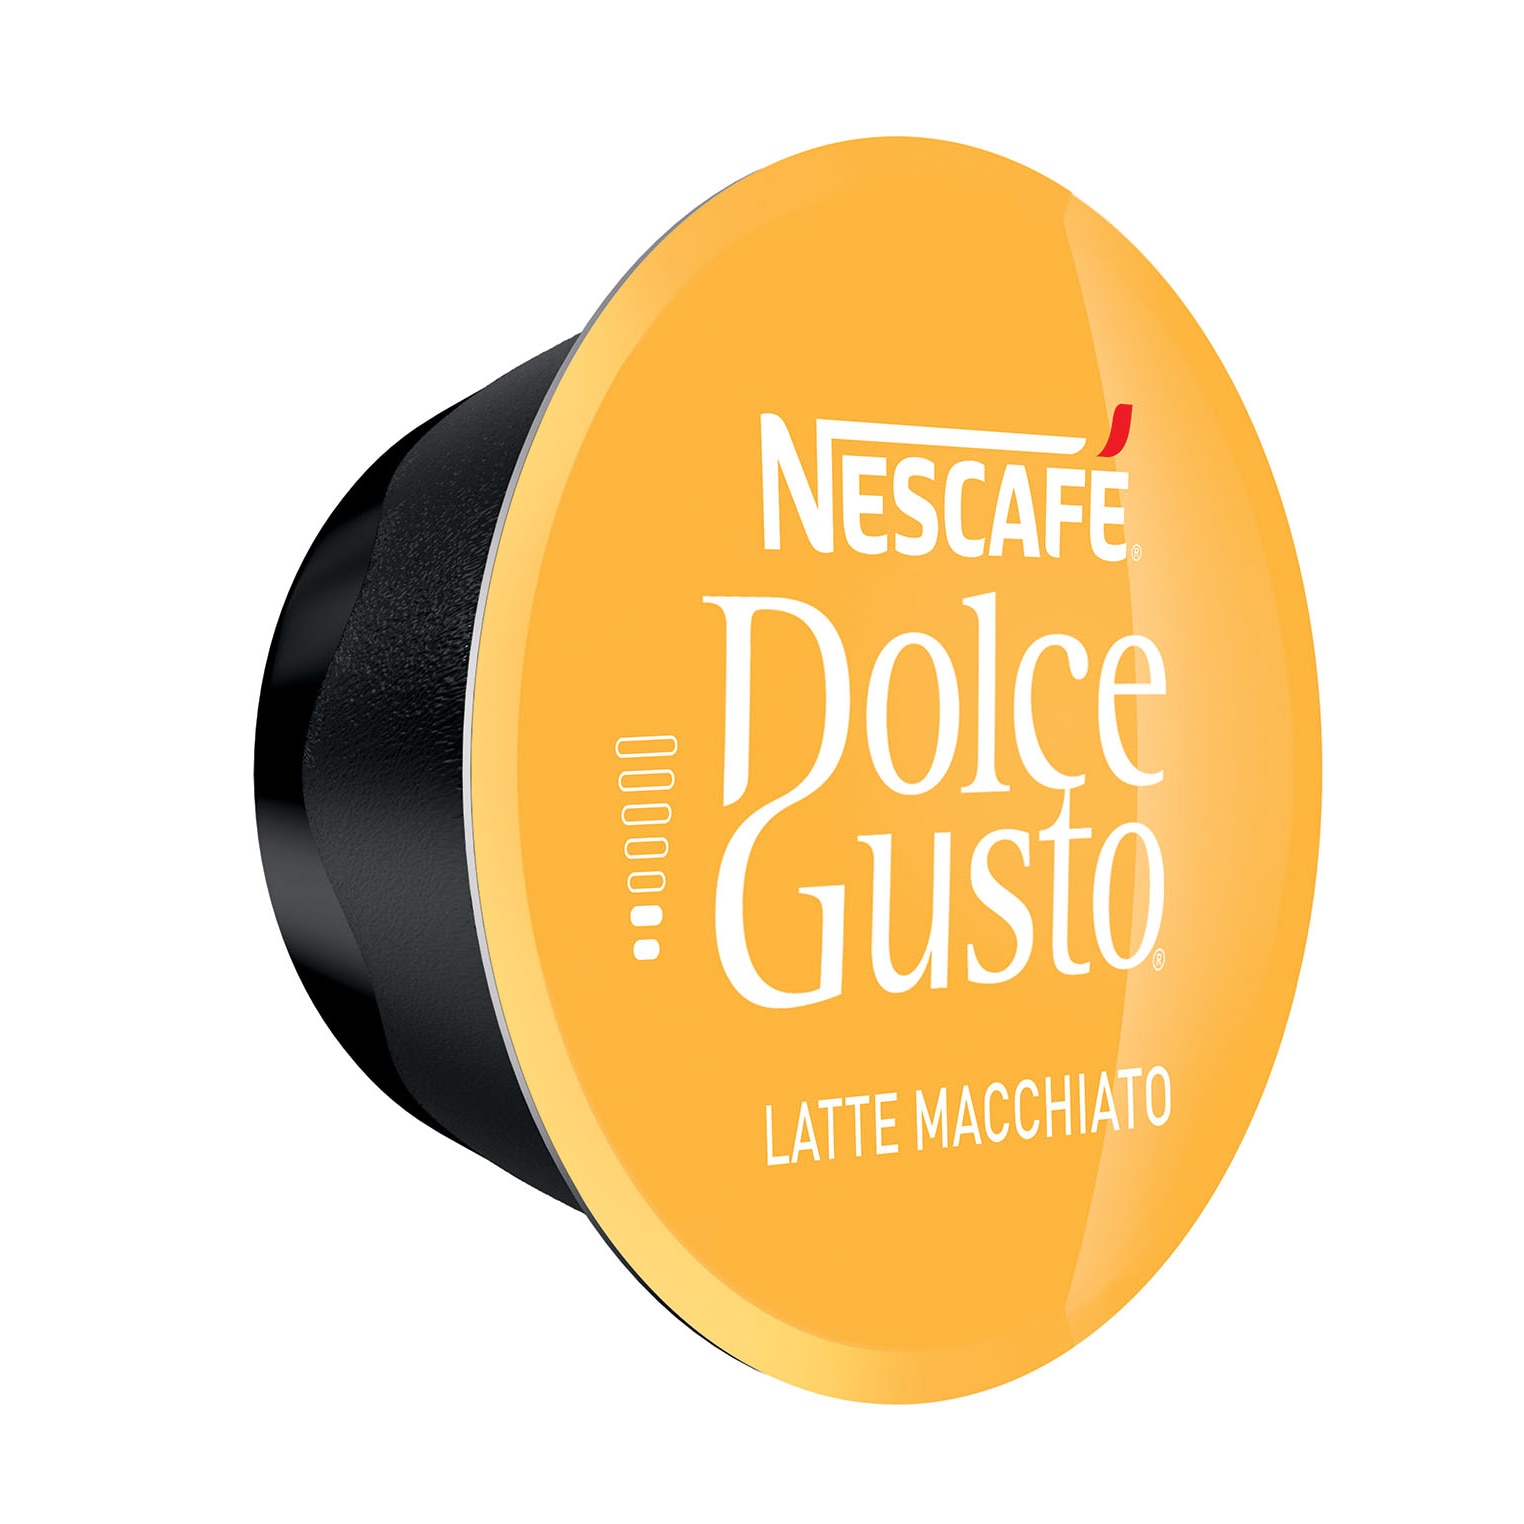 Dolce gusto cappuccino